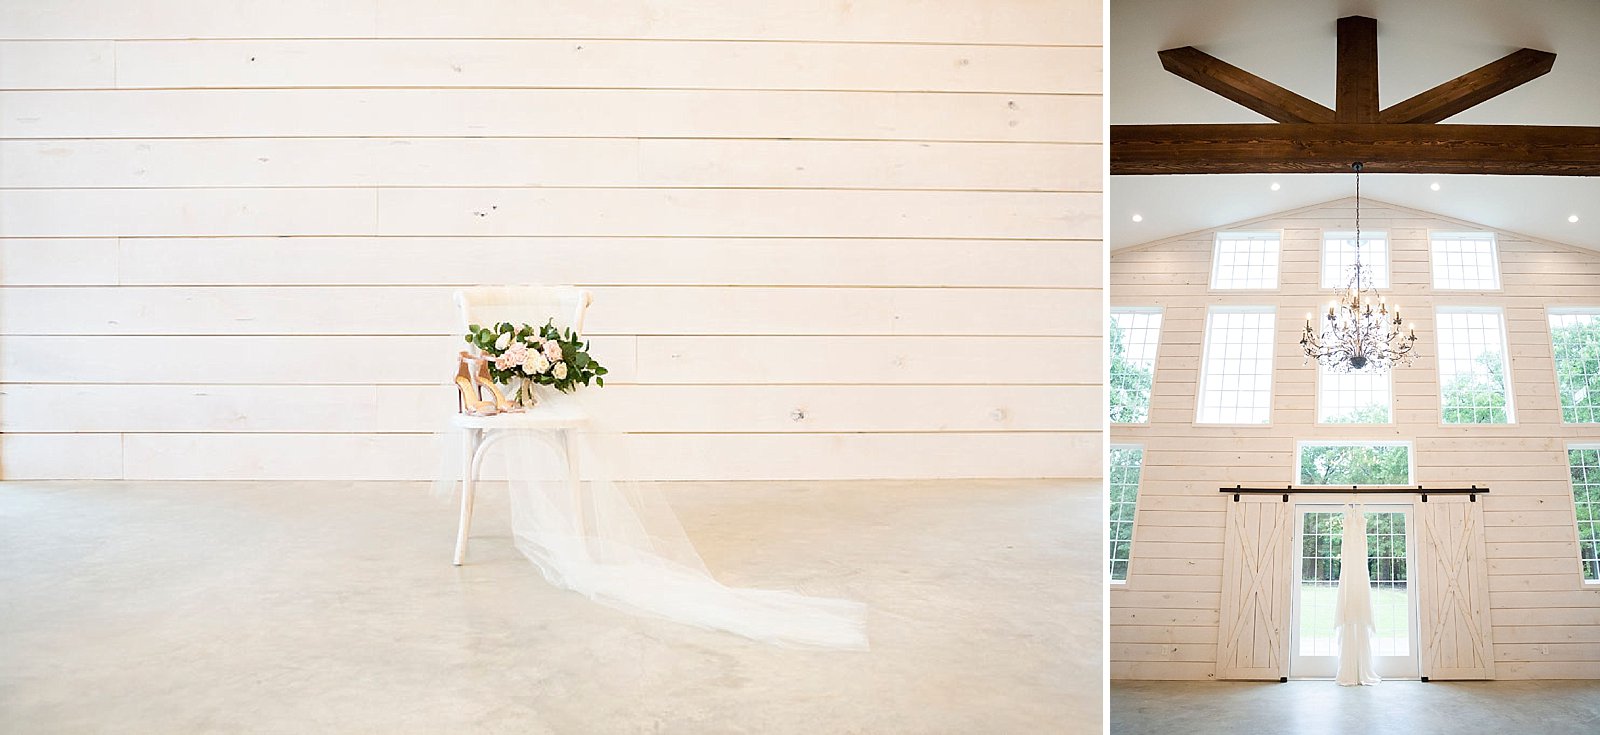 Wedding photography at The Establishment Barn in Texas photographed by Randi Michelle Photography